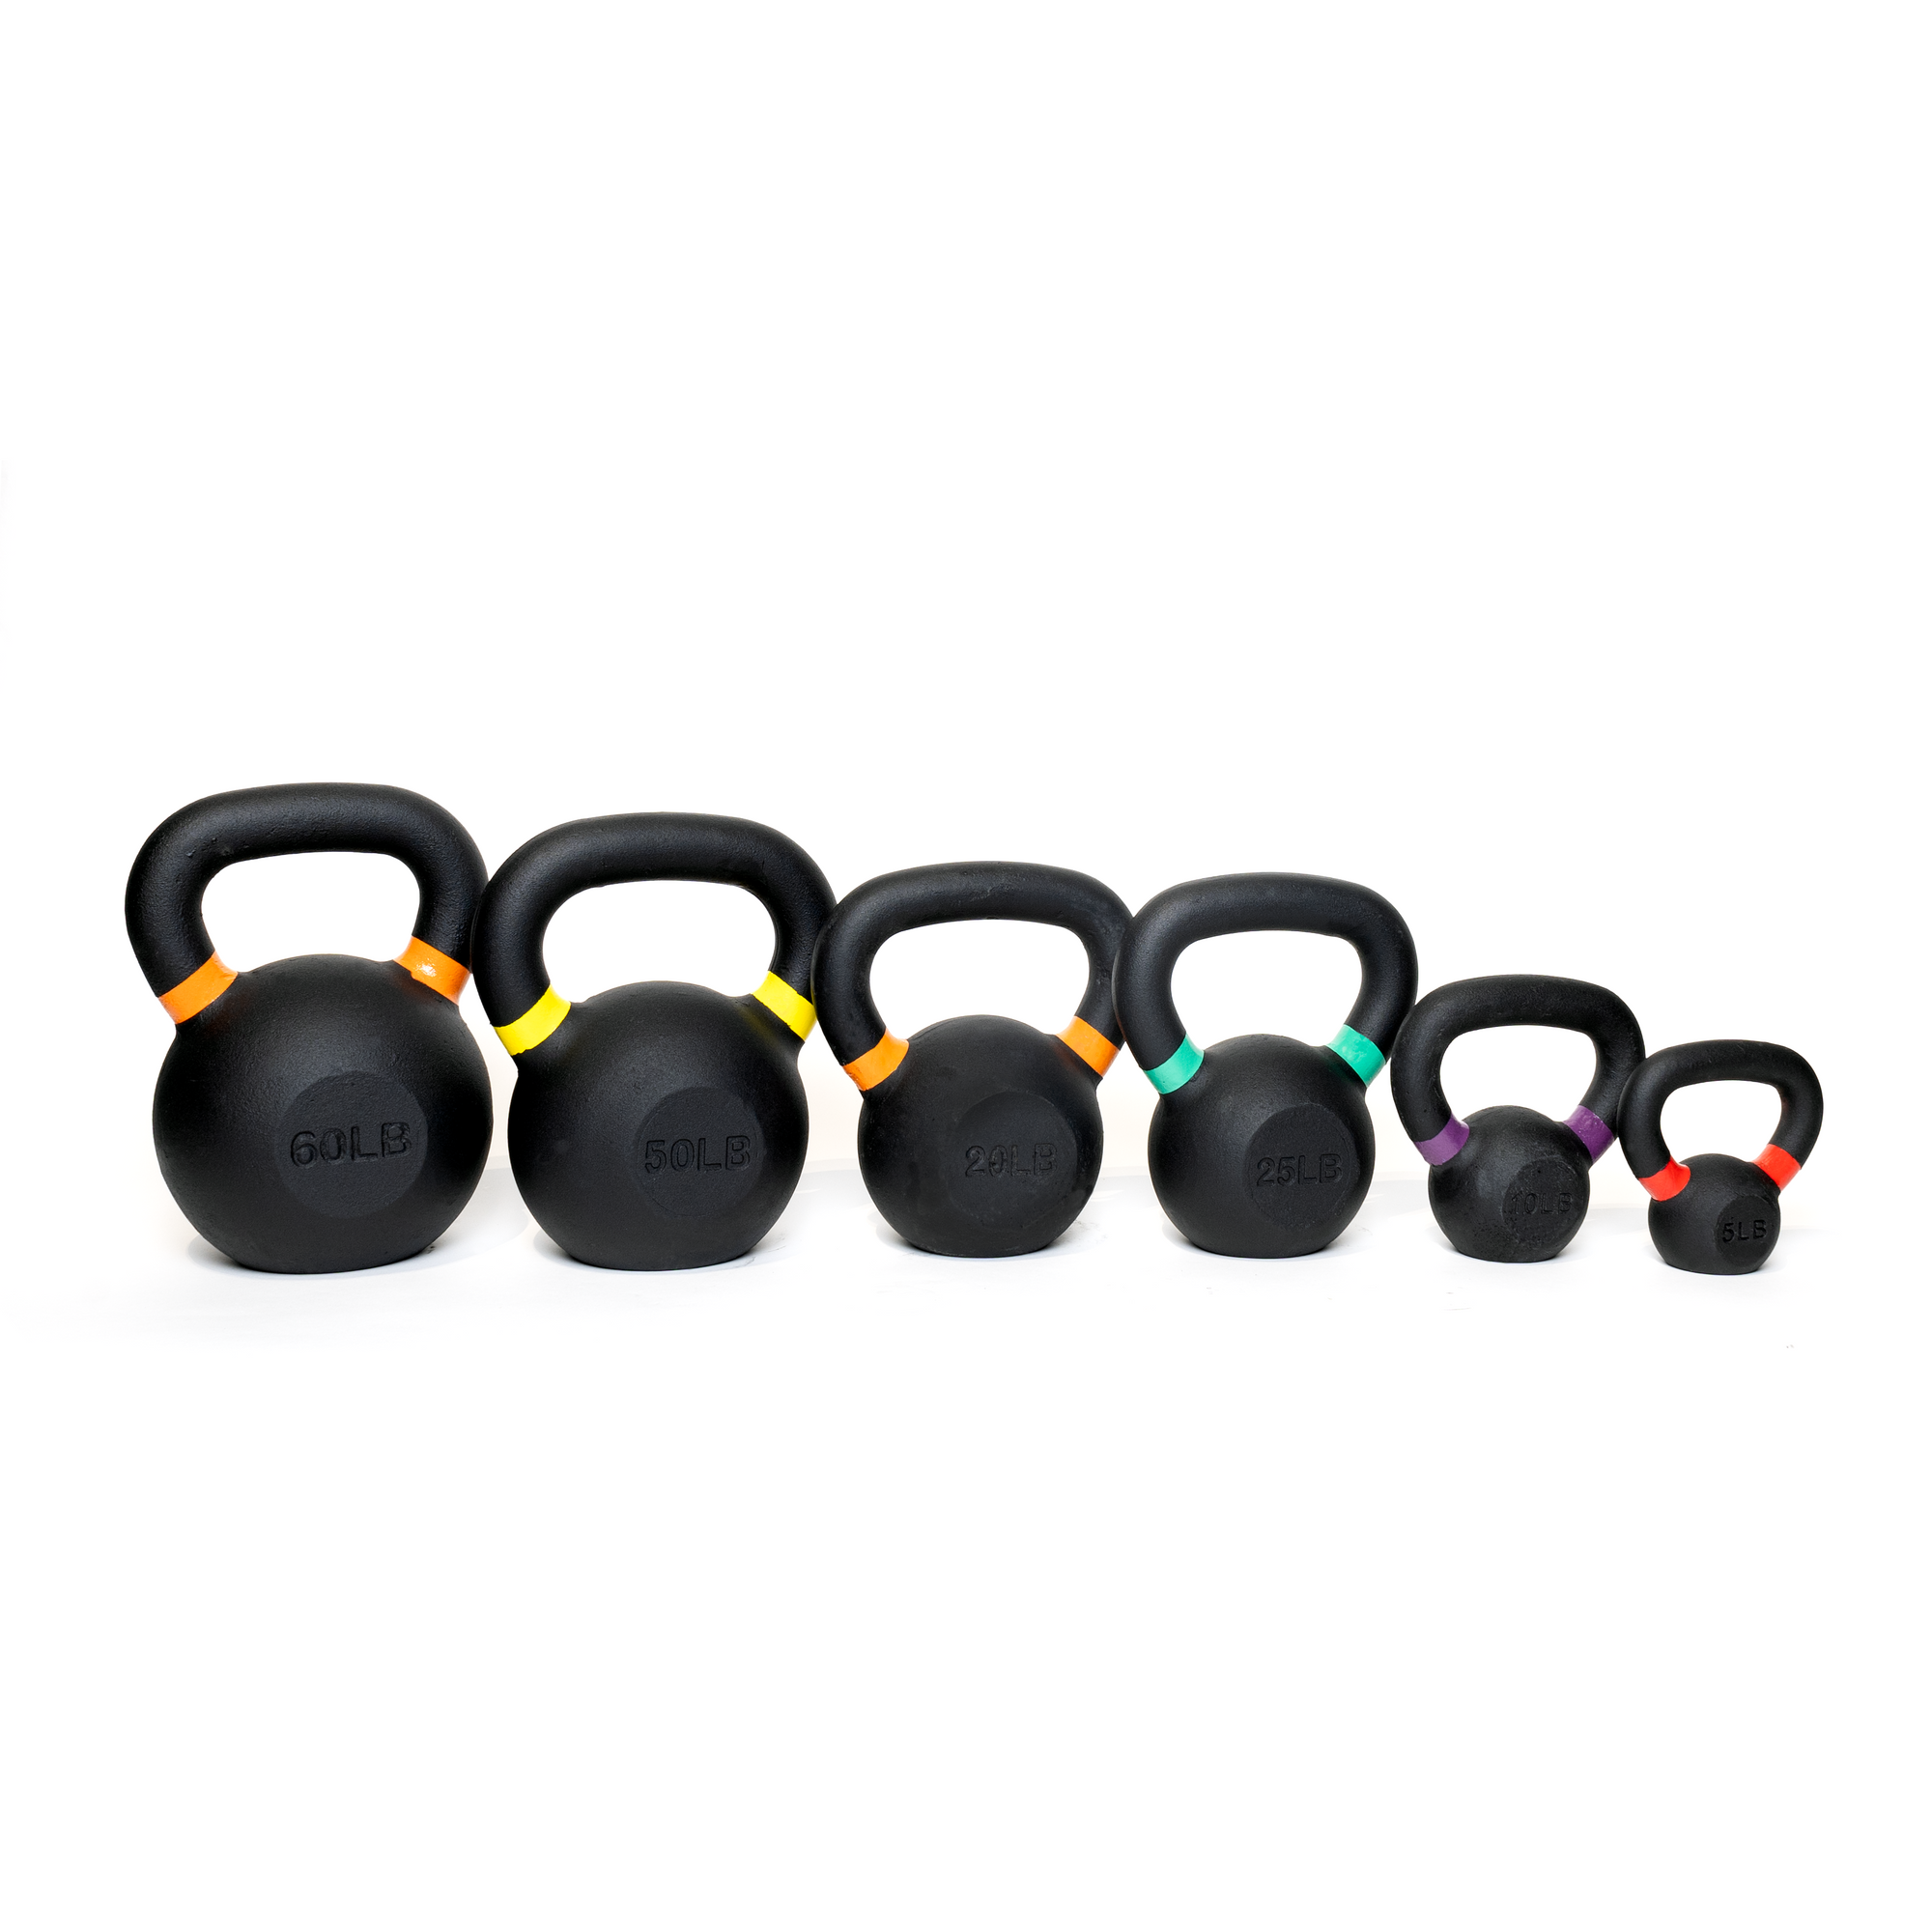 Fitway Cast Iron Kettlebell - 50lb